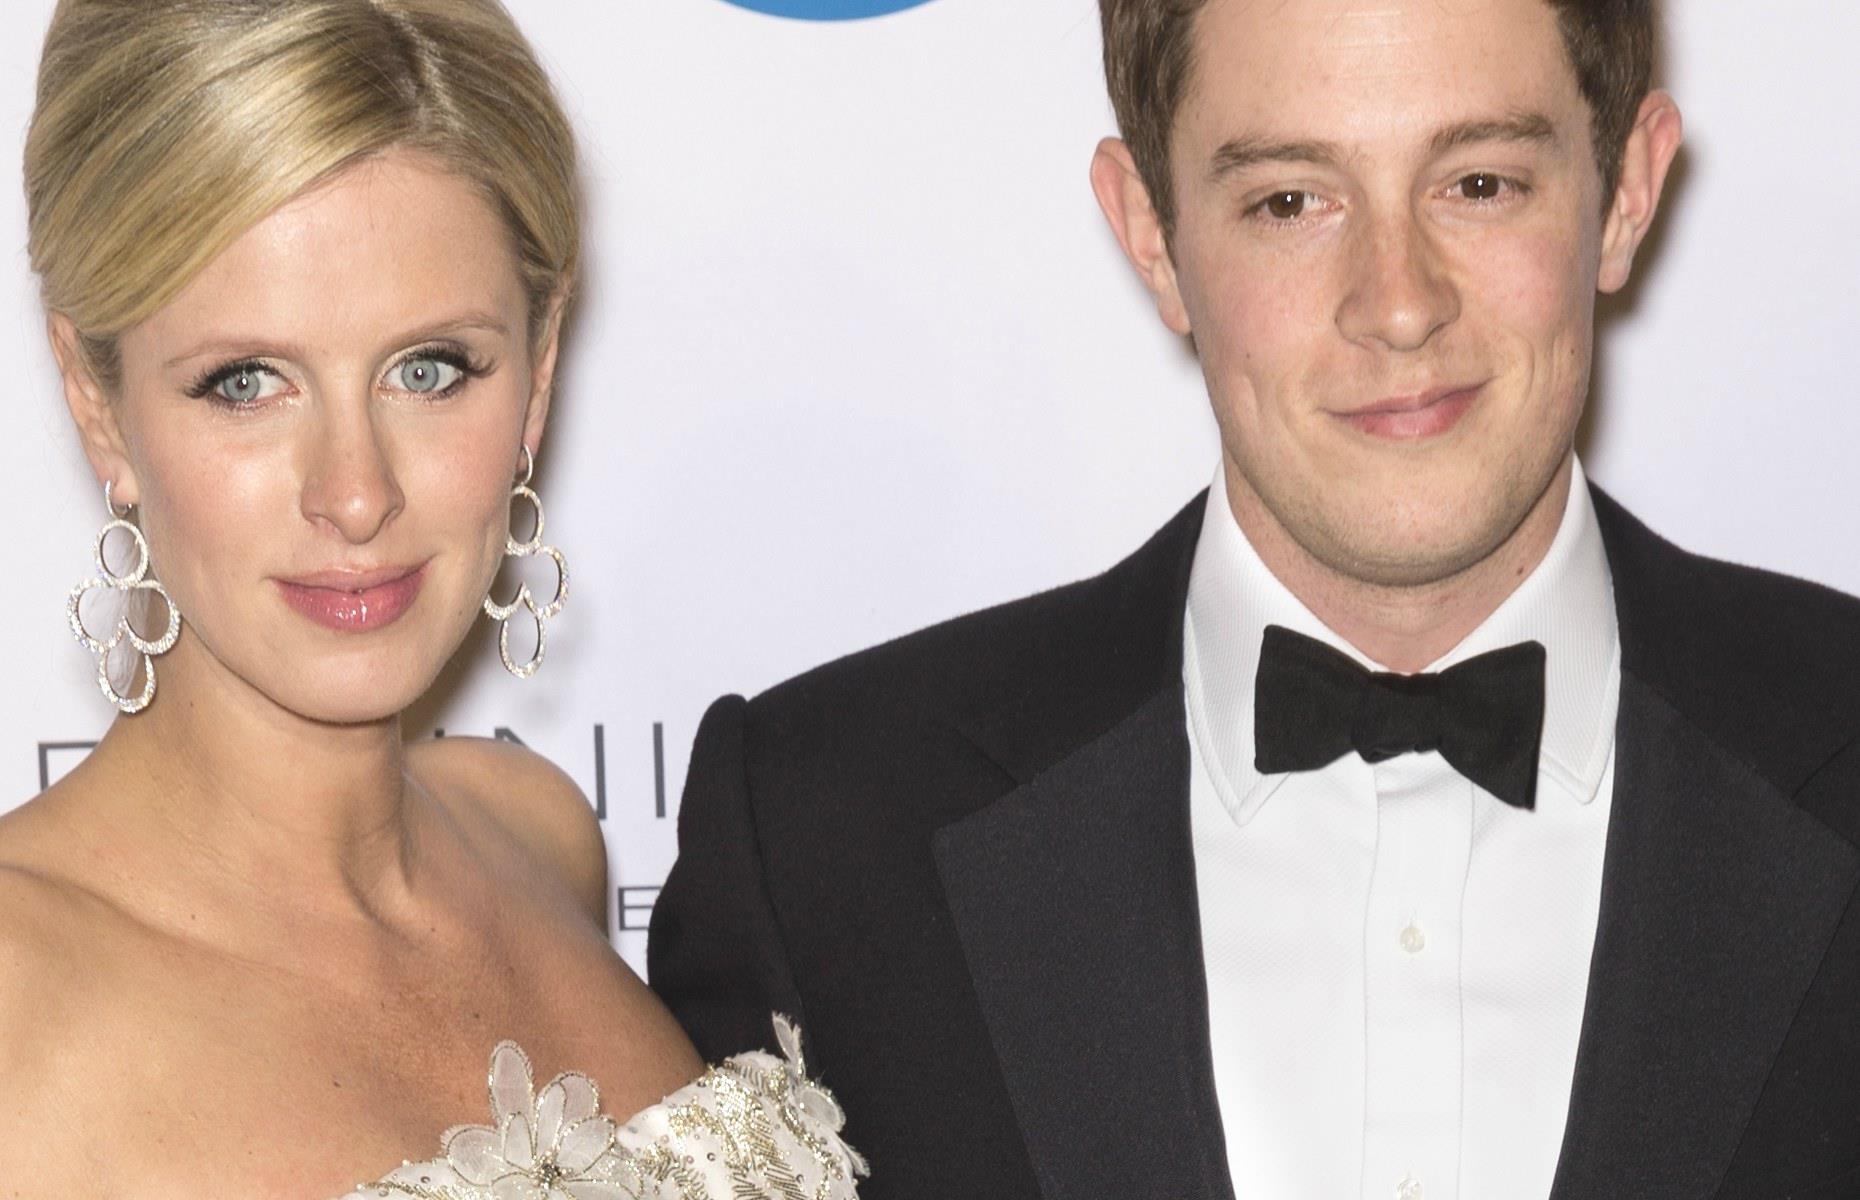 Nicky Hilton and James Rothschild (costs incalculable)